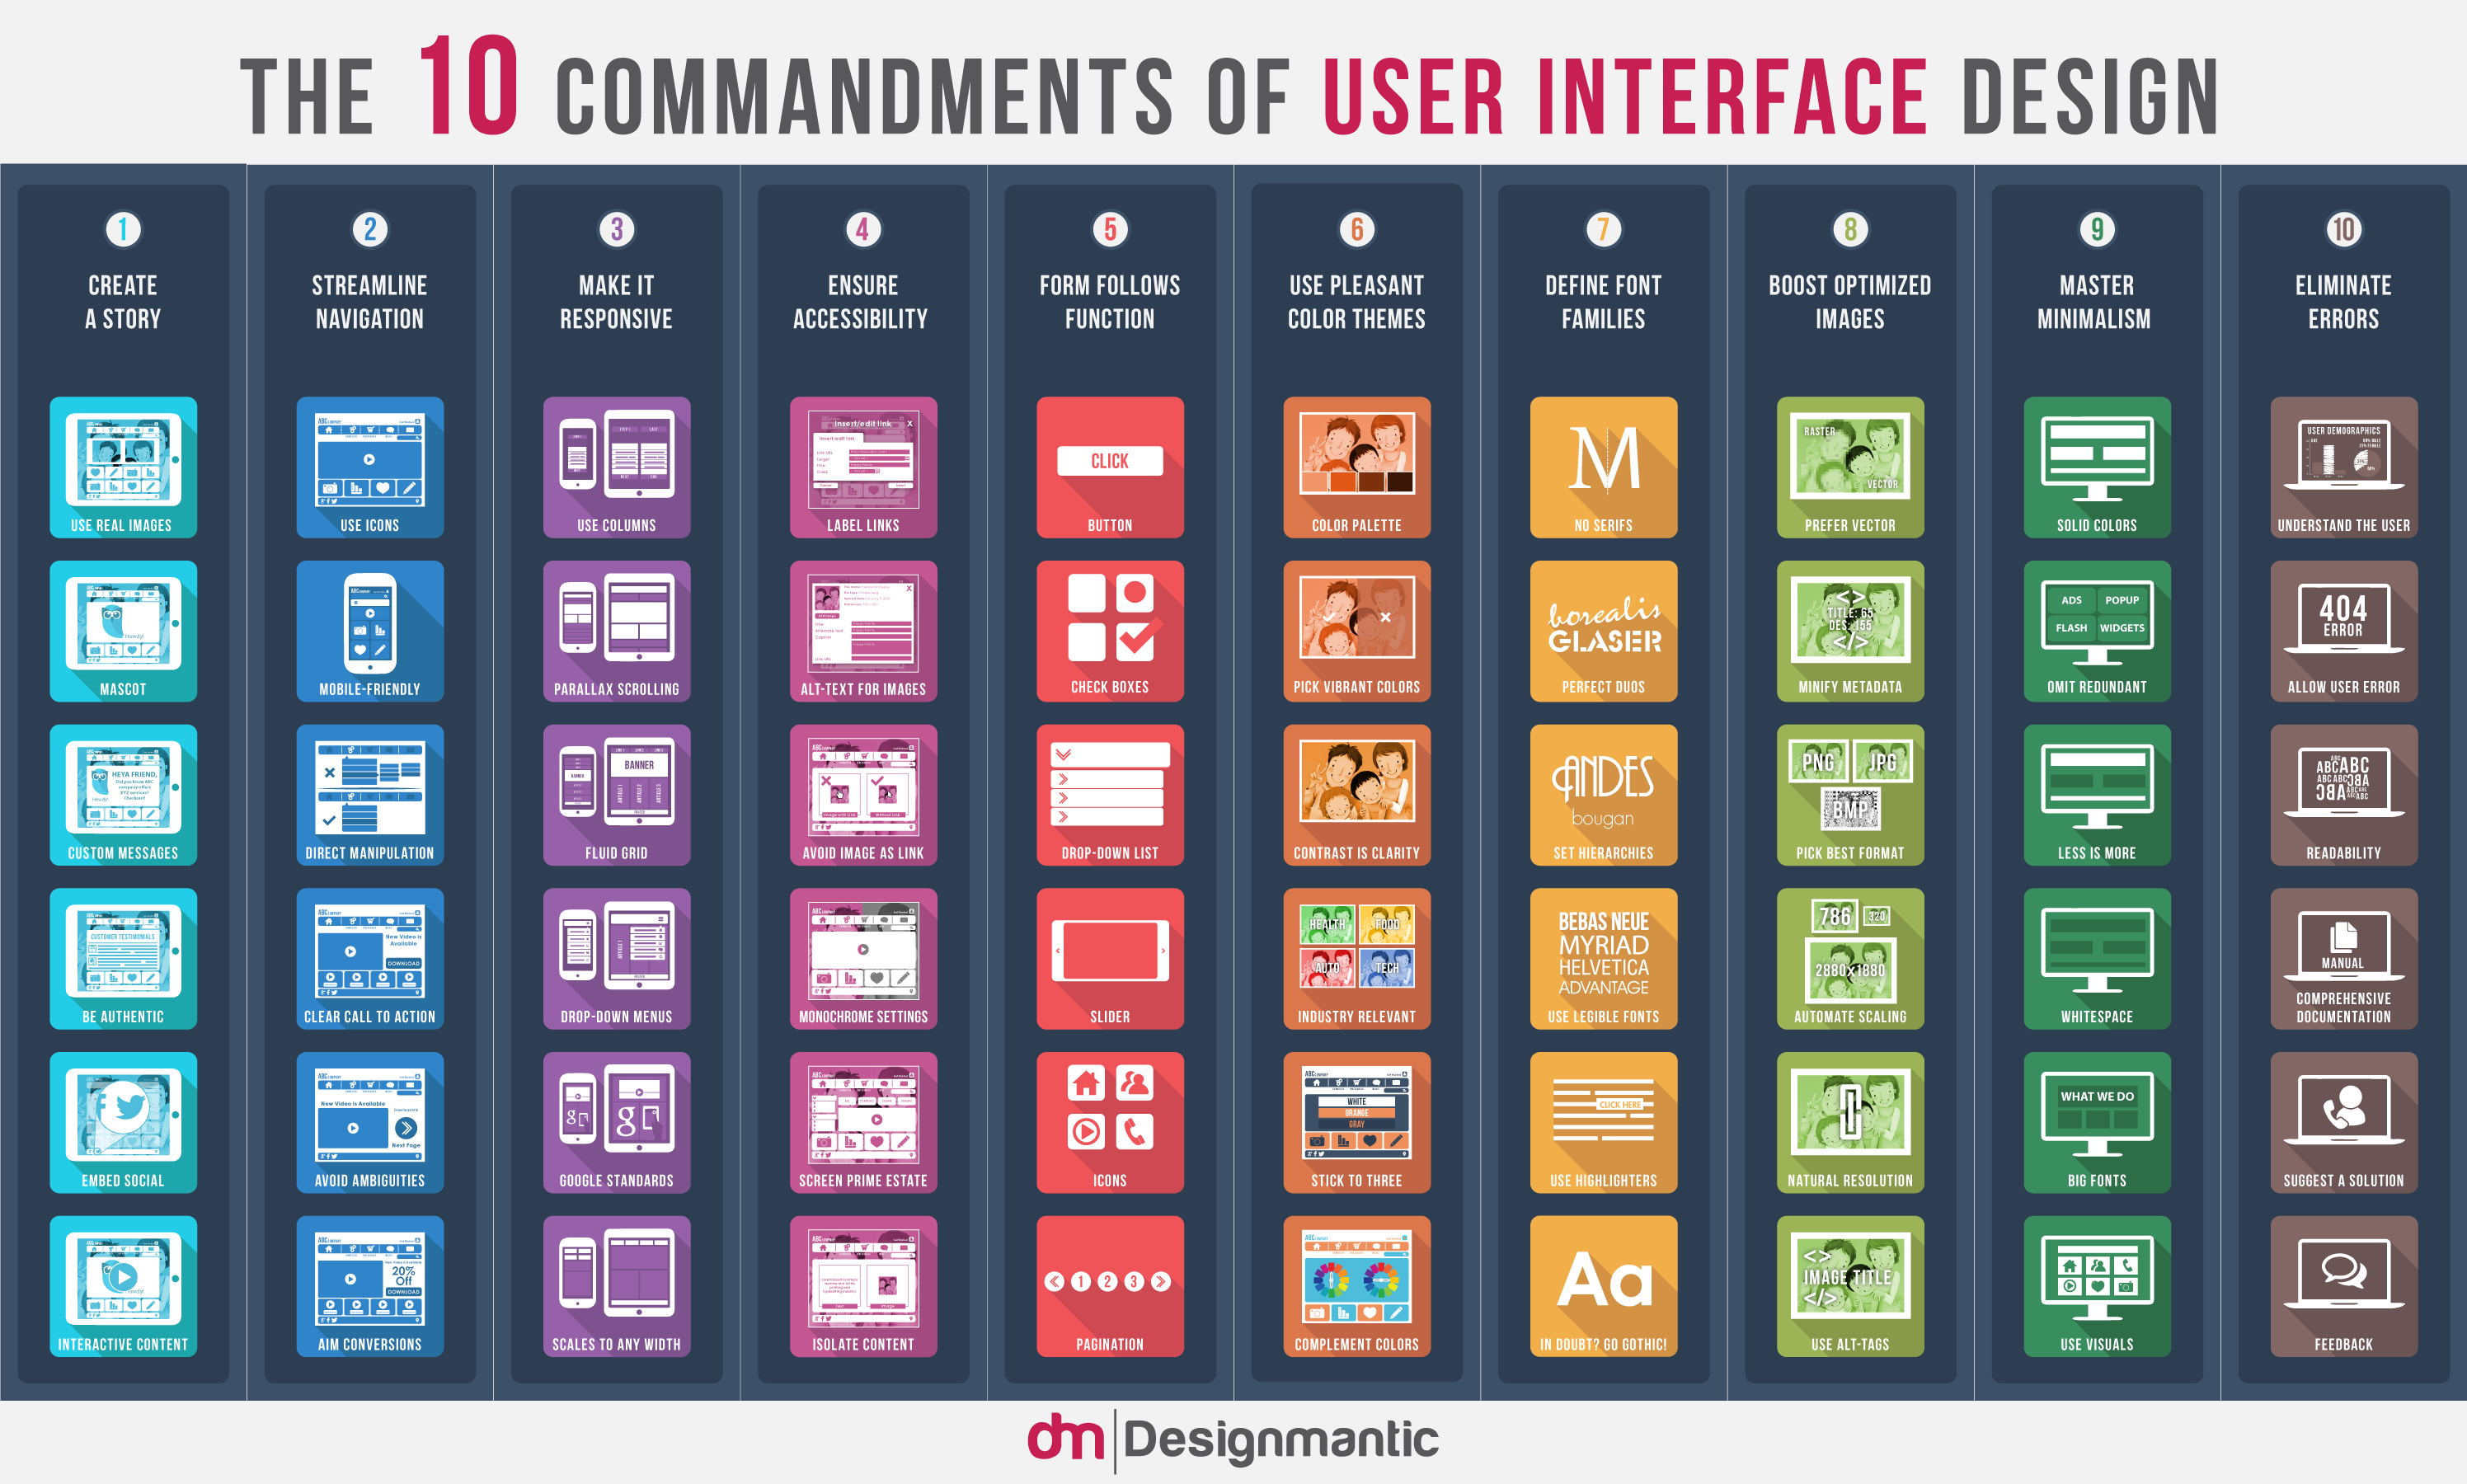 What is the best type of user interface?